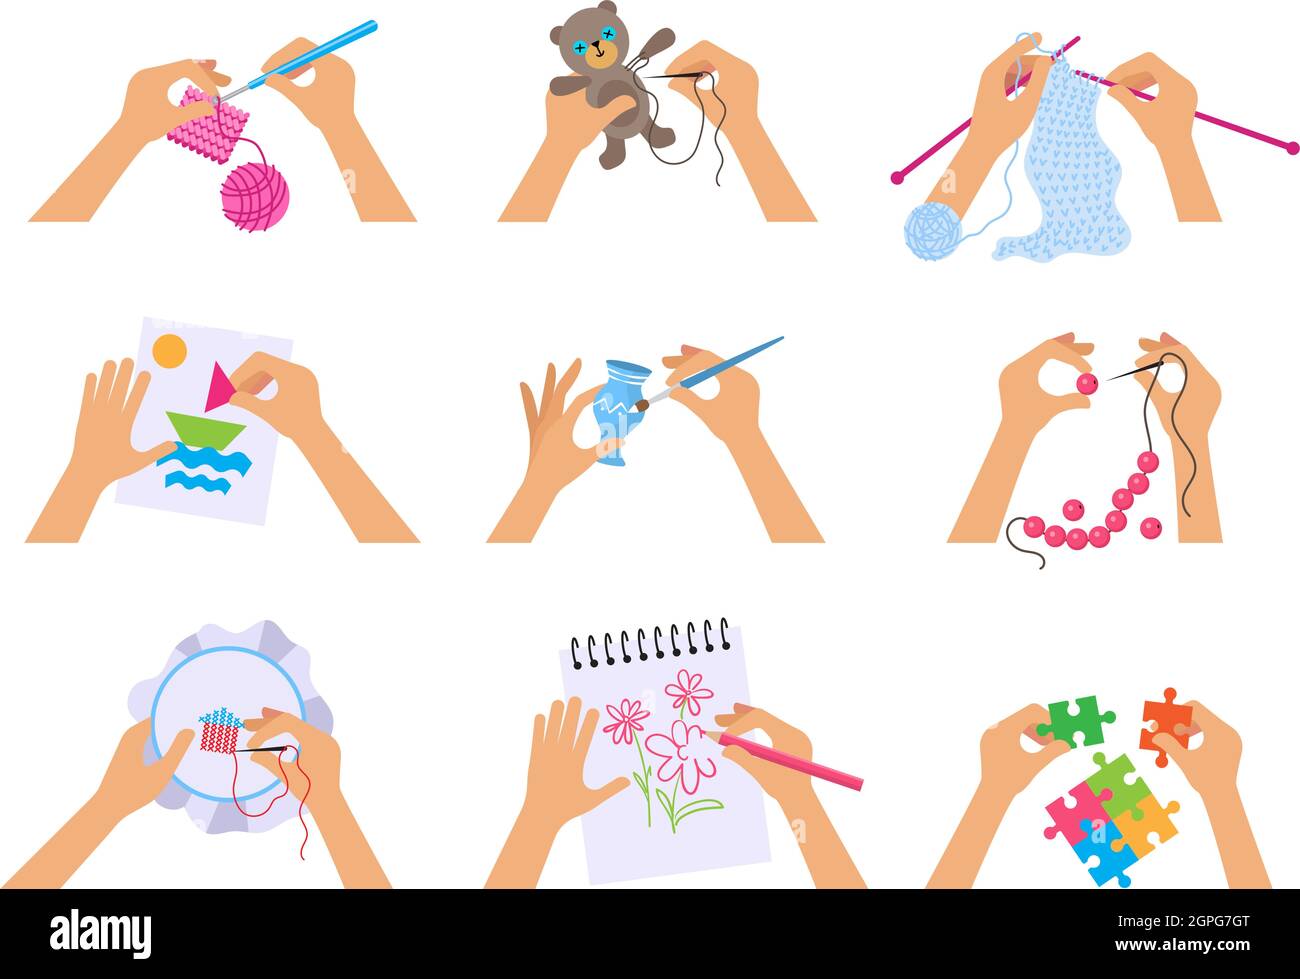 Hands crafting. Kids knitted drawing illustrations with brush and scissors cutting paper scrapbooking vector top view illustrations Stock Vector